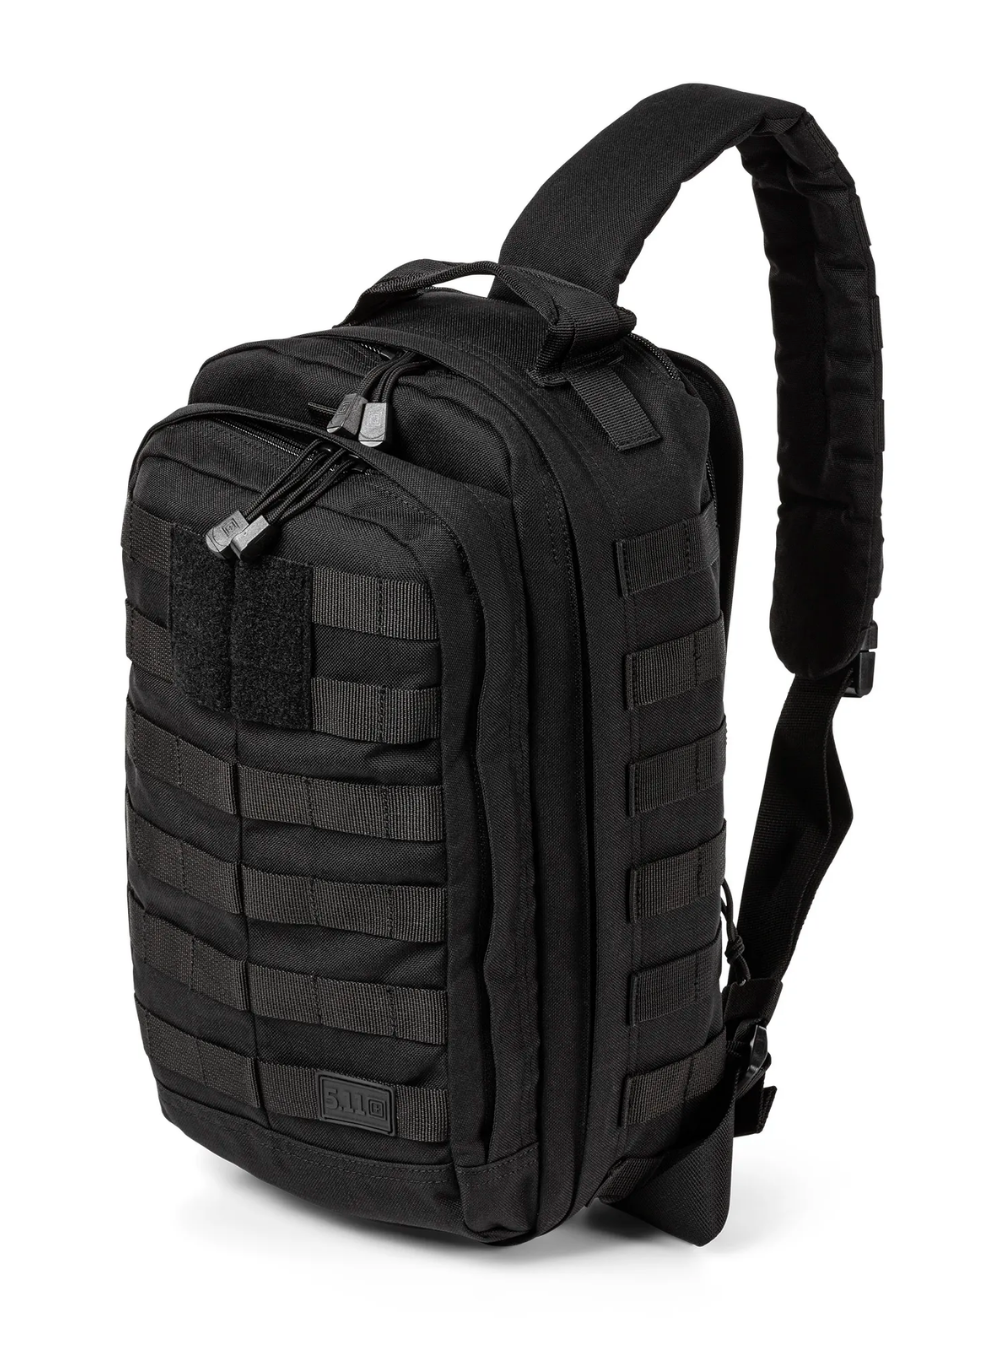 5.11 Tactical MOAB 8 Backpack